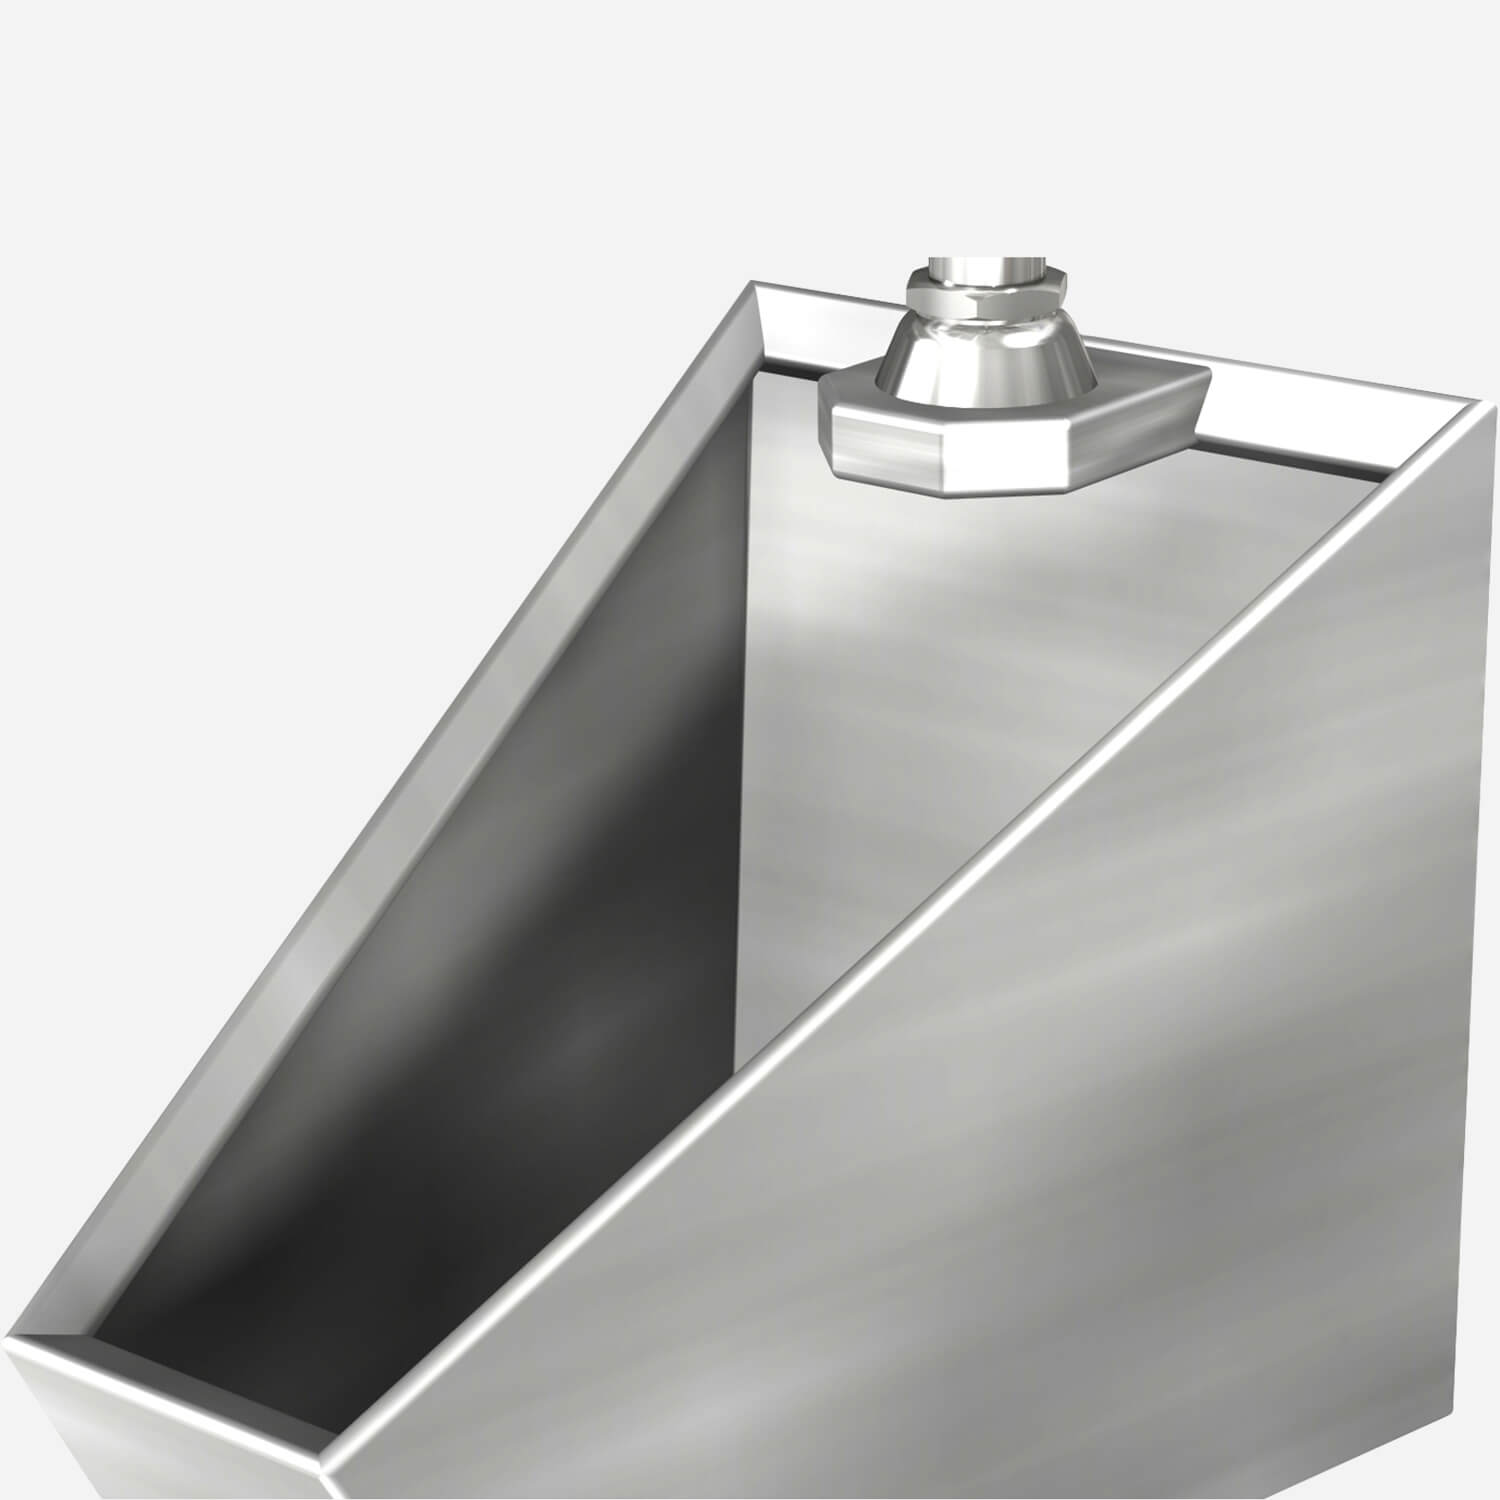 GENWEC: WALL HUNG URINAL 304 STAINLESS STEEL